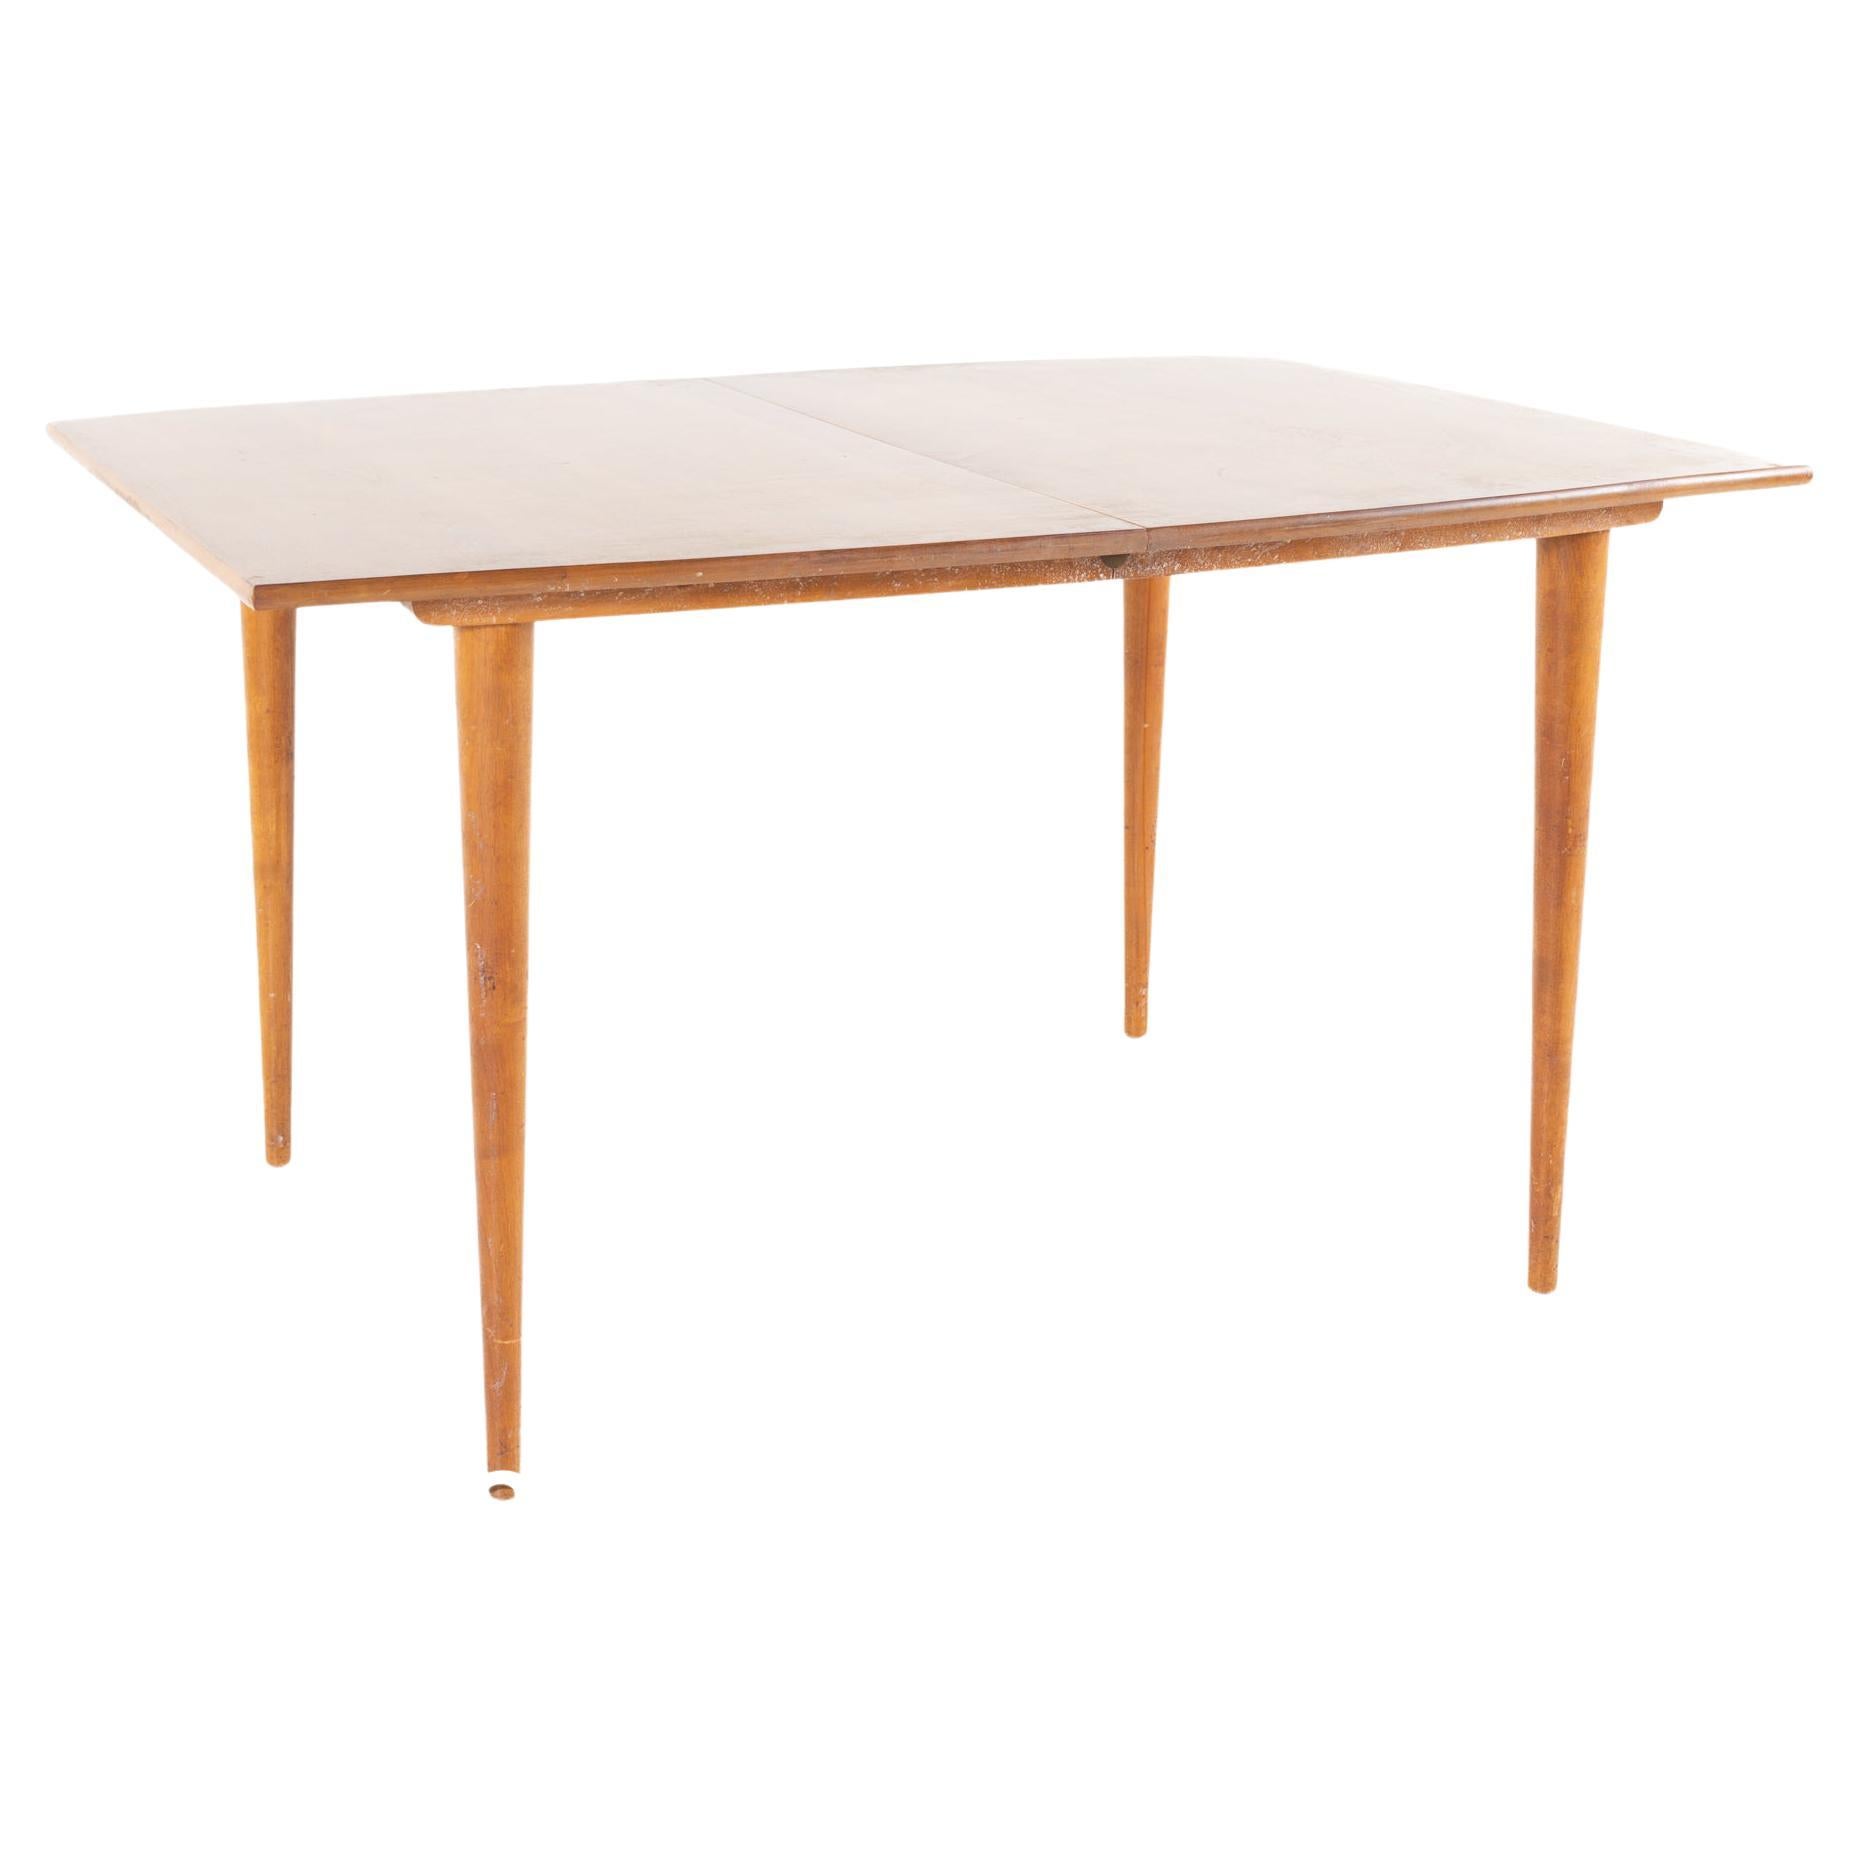 Conant Ball Style Mid-Century Blond Rectangular Dining Table with Peg Legs